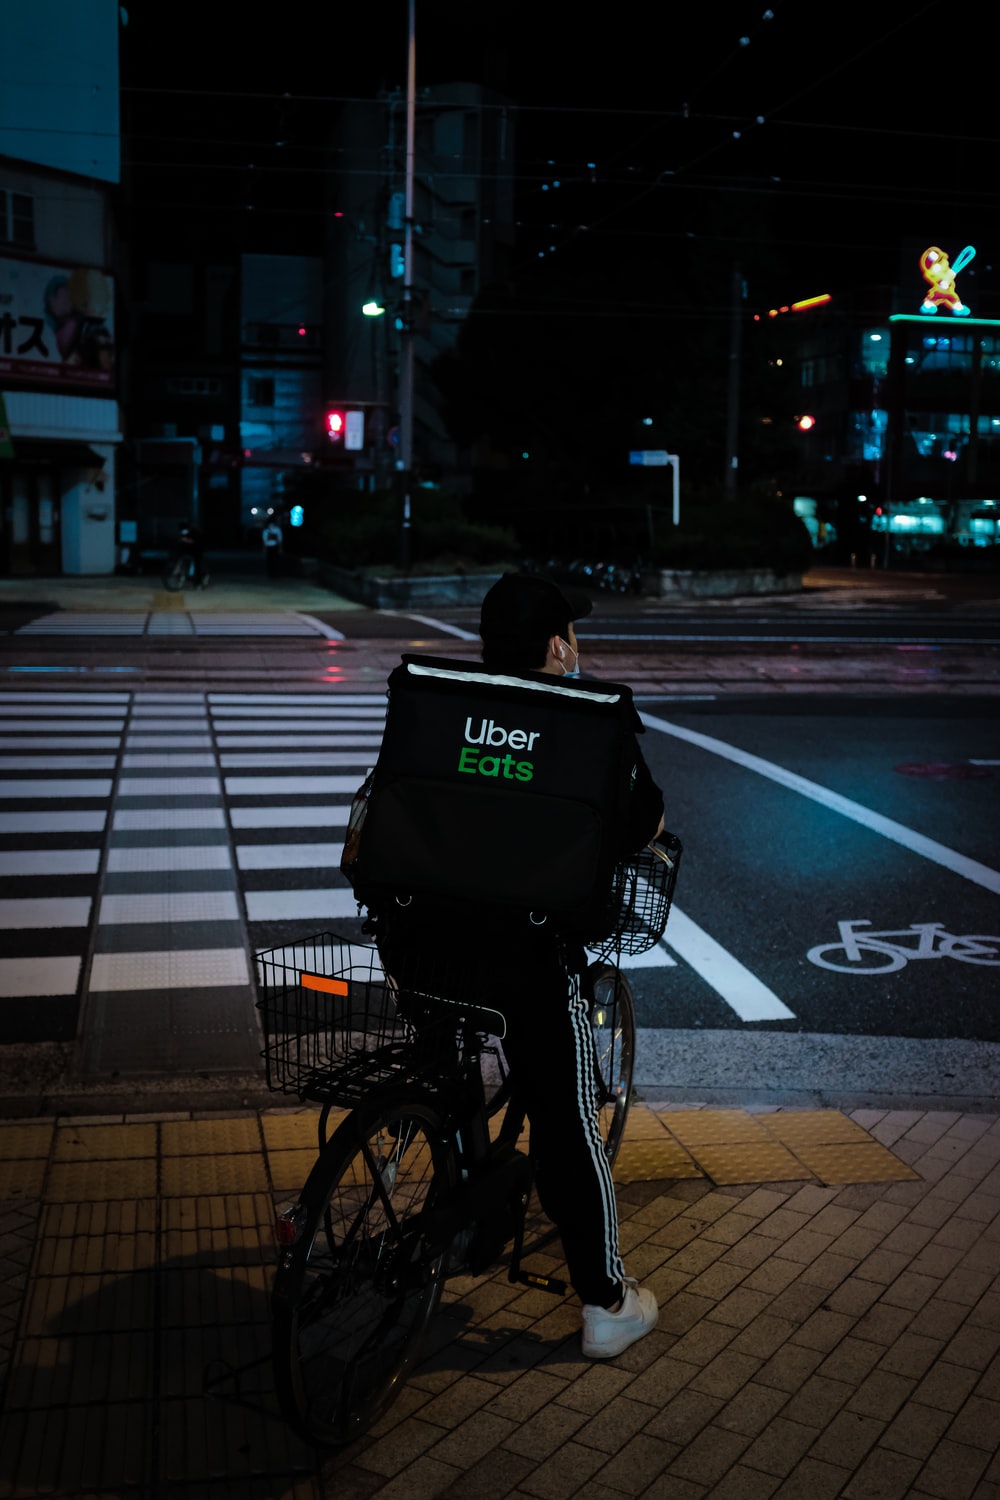 Uber Eats Picture. Download Free Image